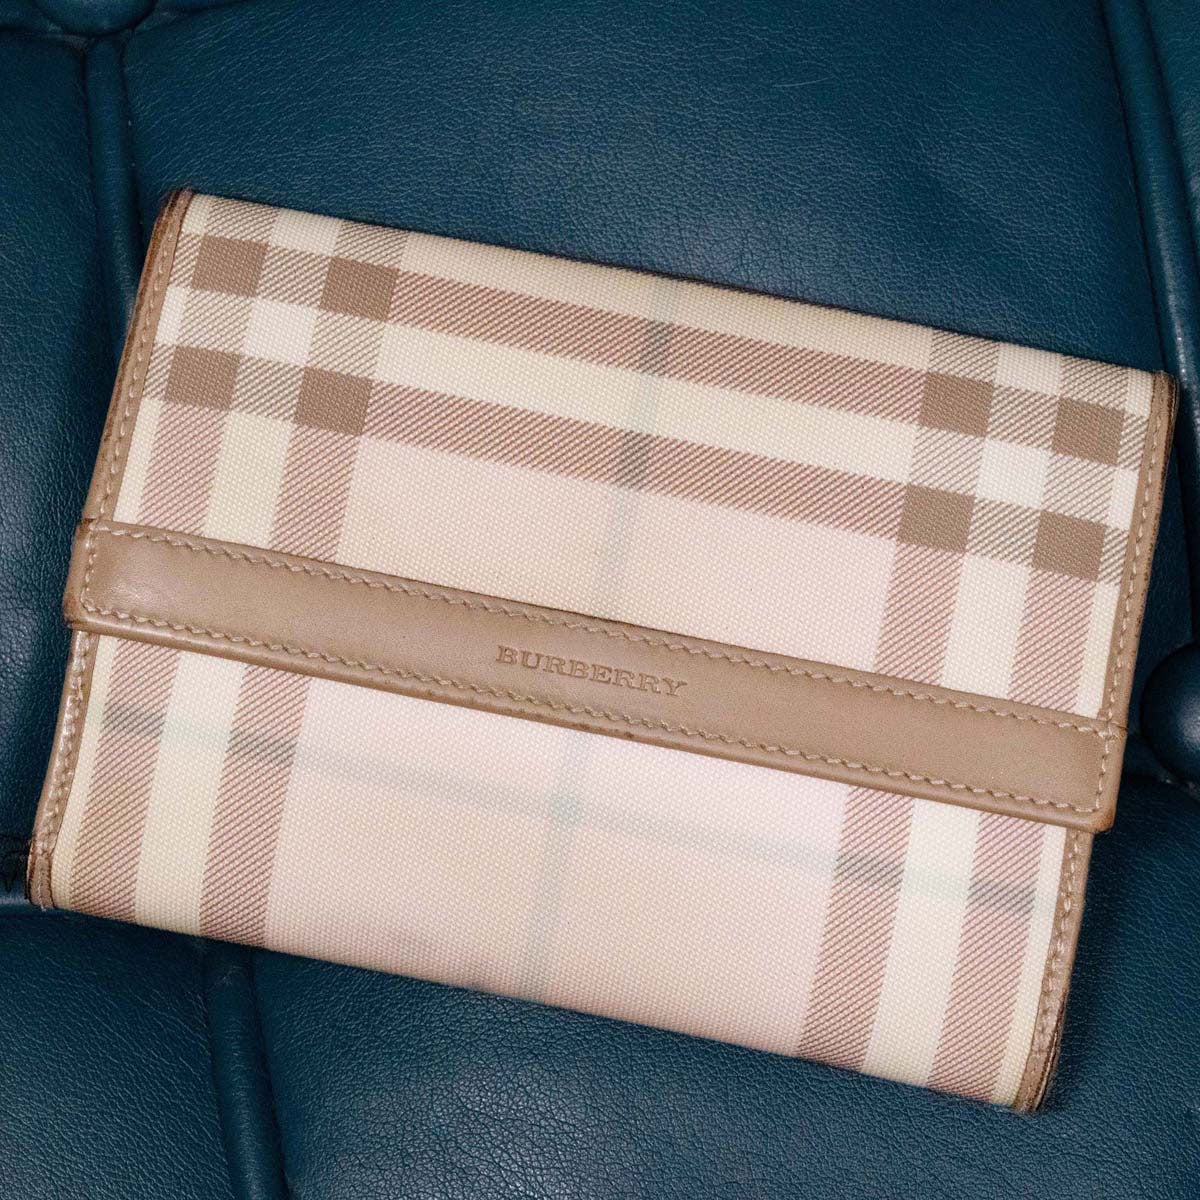 Burberry, Bags, Burberry Wallet New